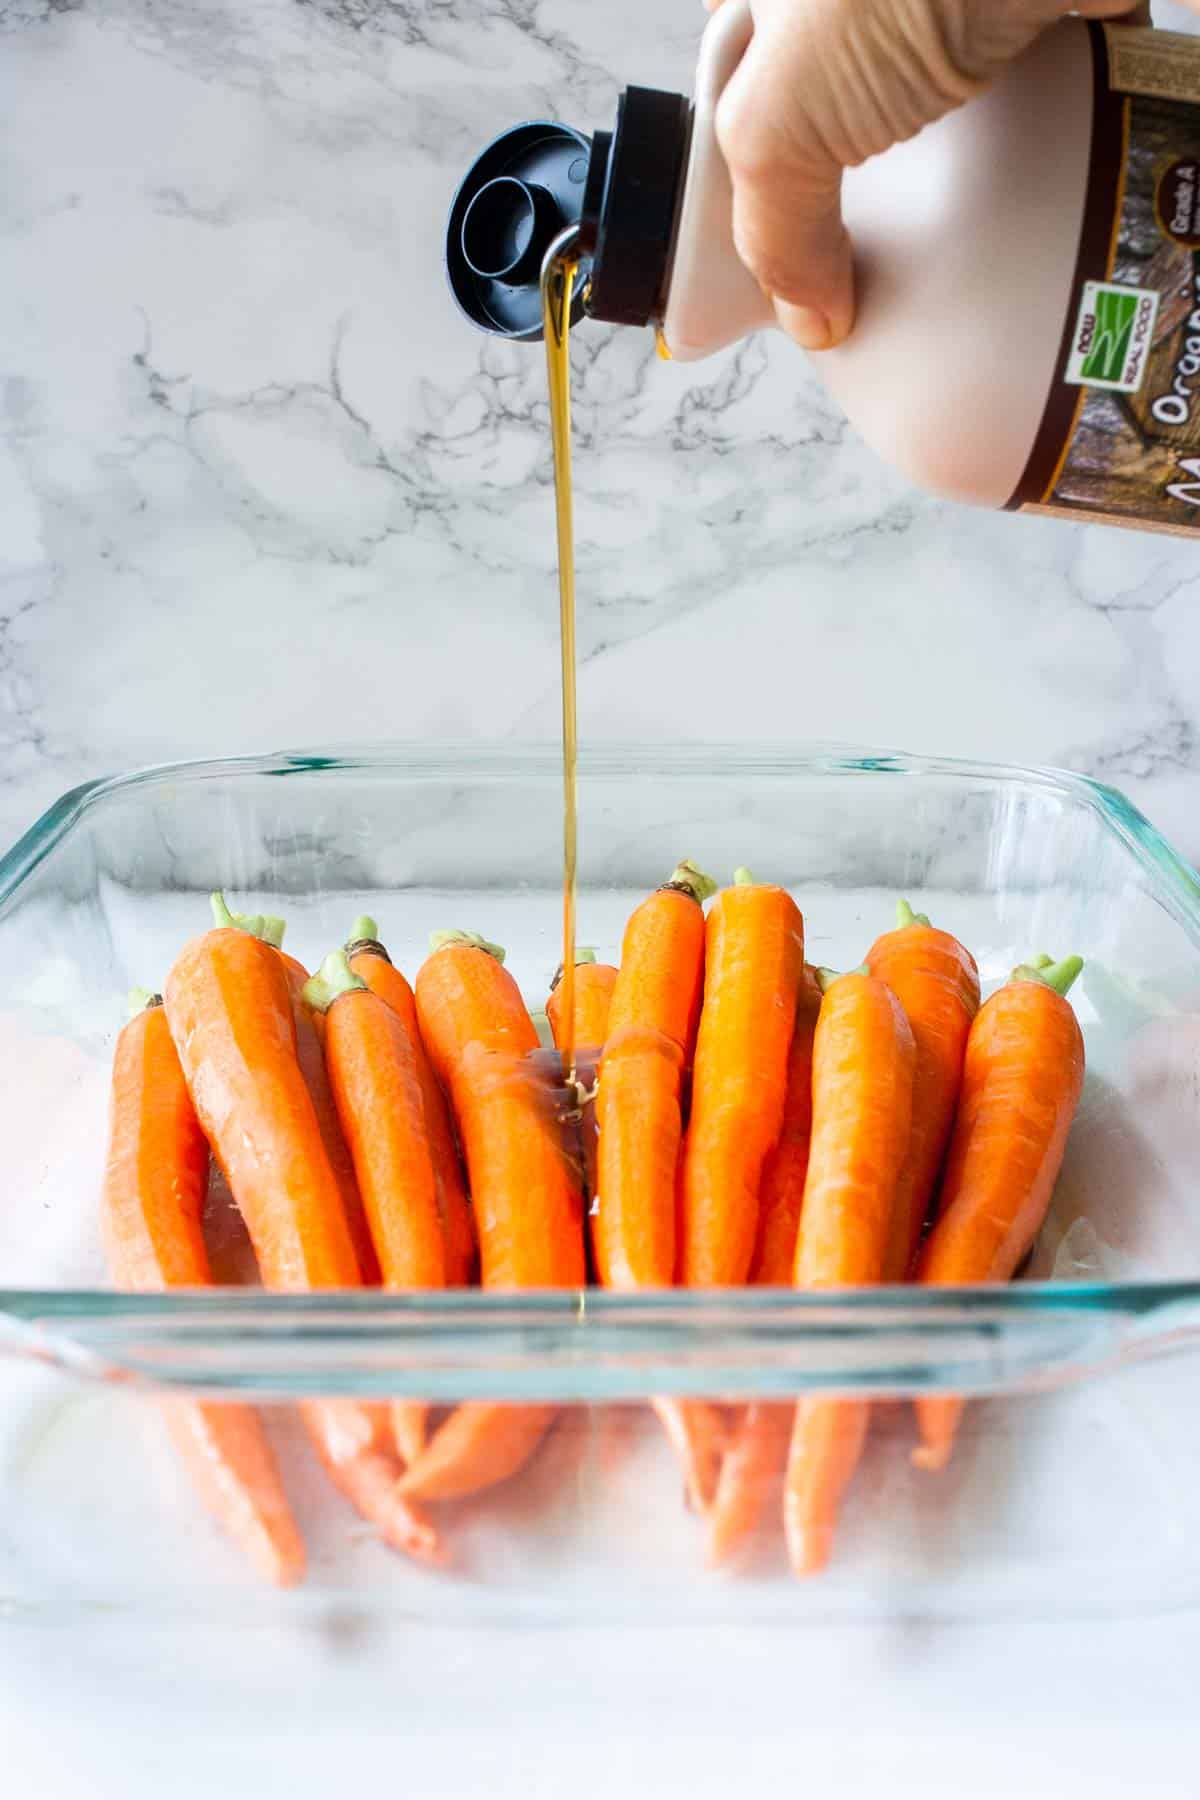 Front view of hand pouring maple syrup over carrots in a glass baking dish.